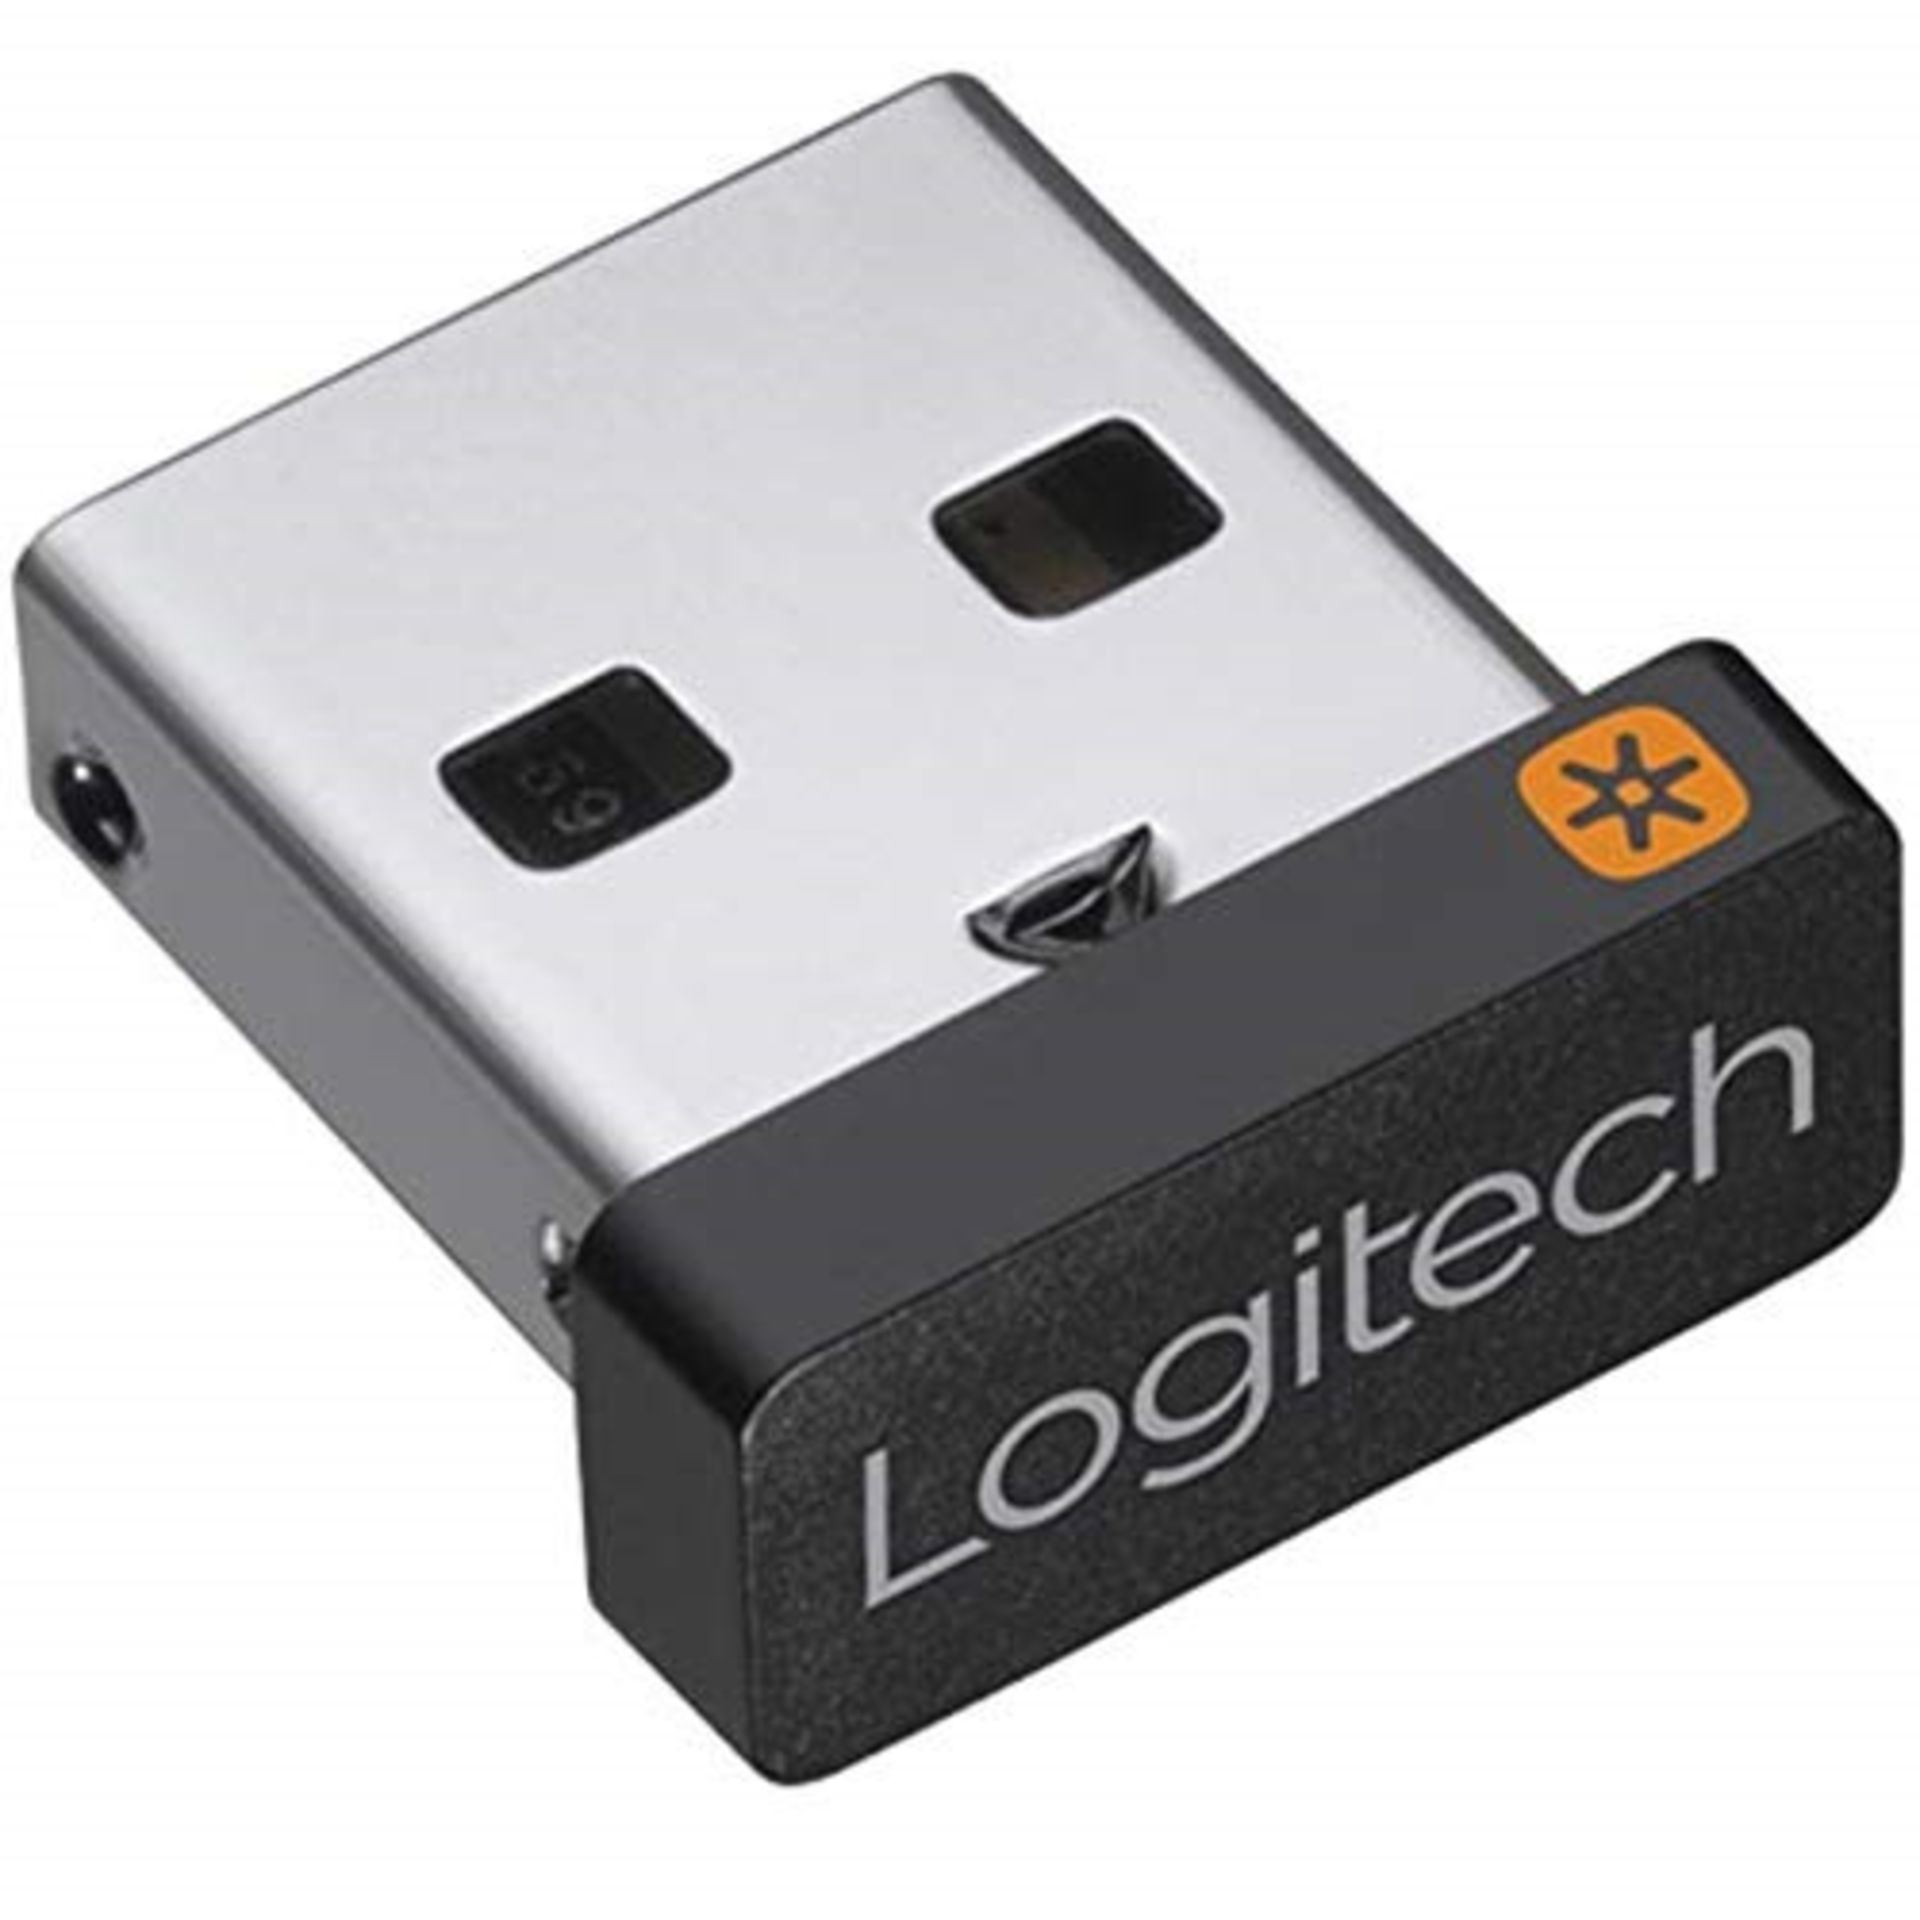 Logitech USB Unifying Receiver, 2.4 GHz Wireless Technology, USB Plug Compatible with